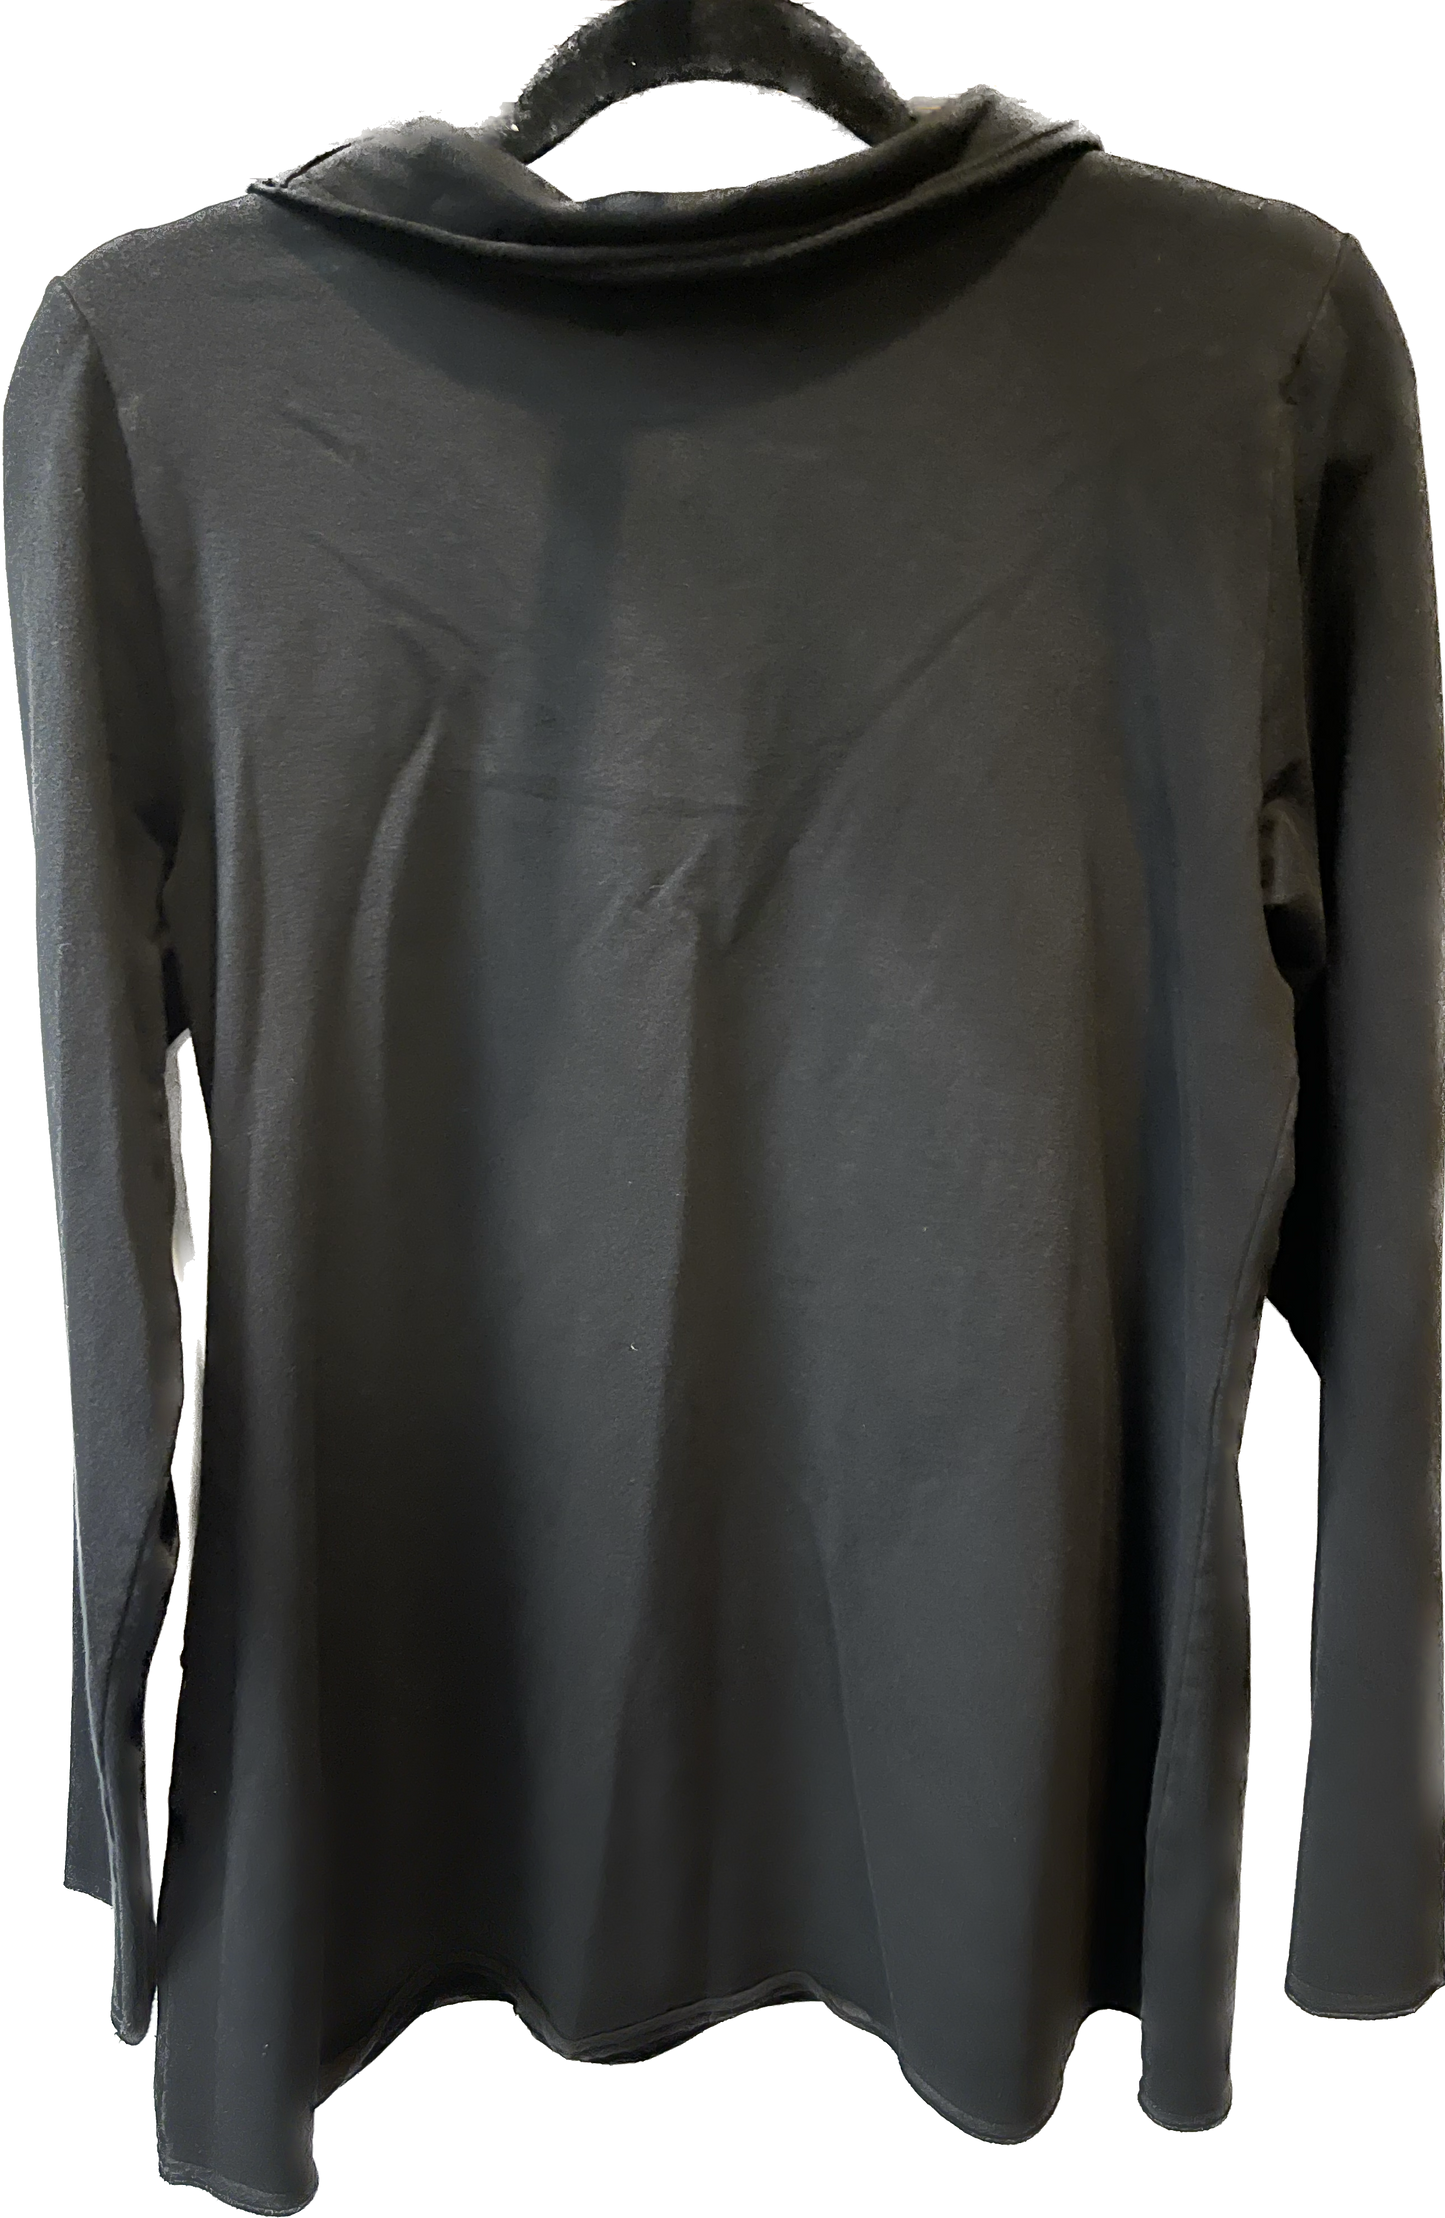 Black Patch Tunic with Raw Edge